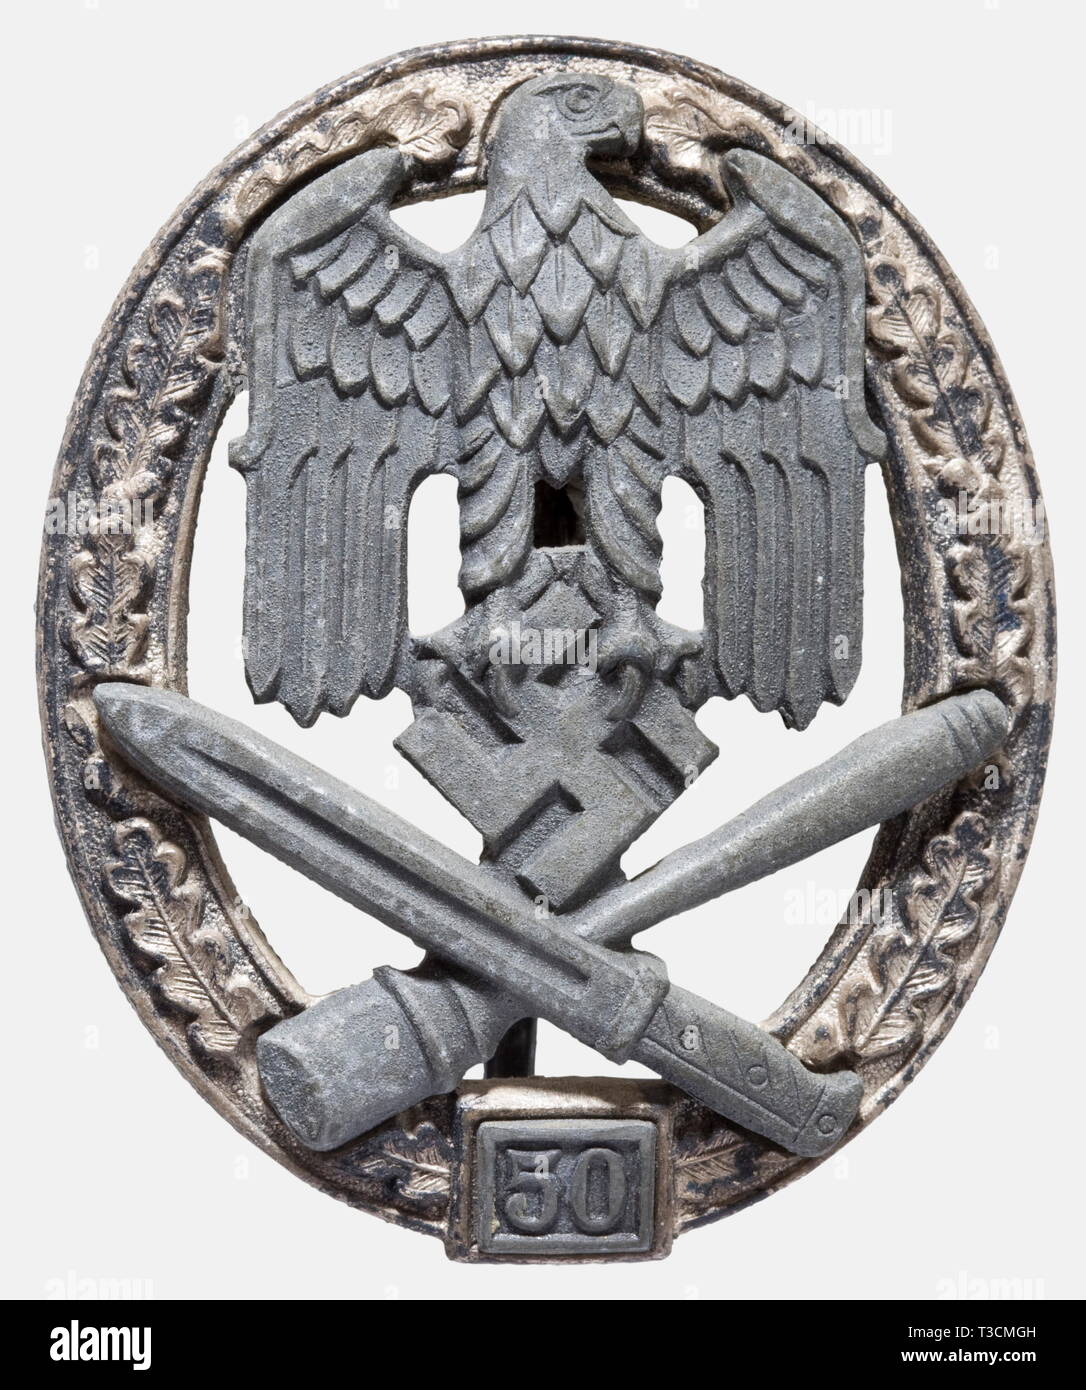 A General Assault Badge, for "50" engagements Solid fine zinc issue by  maker "RK". Silver-plated wreath with "50" numeral plate, inset attachment  pin with waisted steel needle, eagle appliqué fastened with four